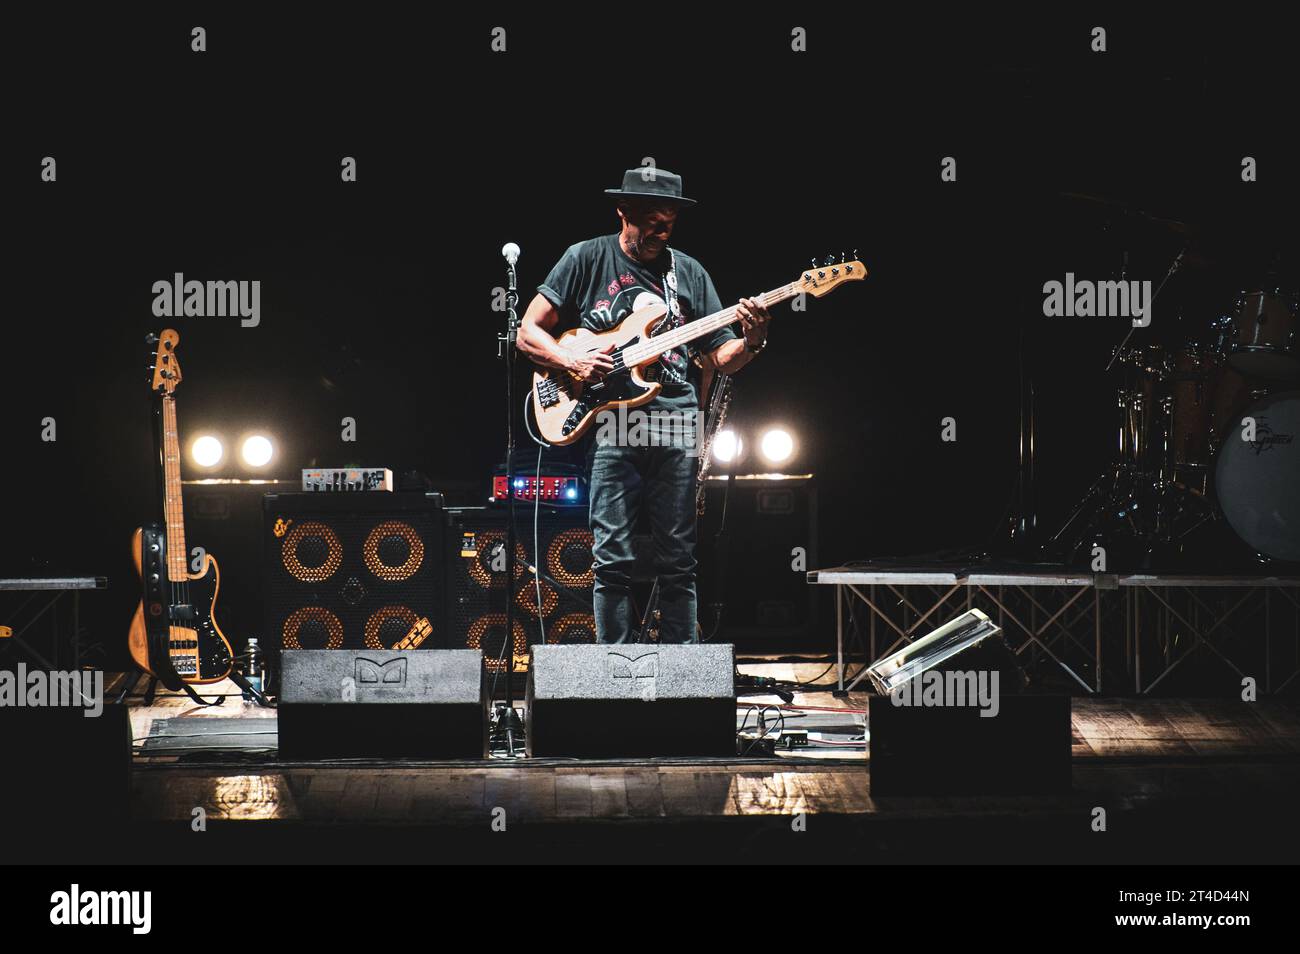 ITALY, TURIN, OCTOBER 29TH: The American jazz/fusion bassist Marcus Miller, multi-instrumentalist, composer (including film music), arranger, leader of his own formations, vocalist, songwriter and producer, performing live on stage in Turin for his European tour 2023. Stock Photo